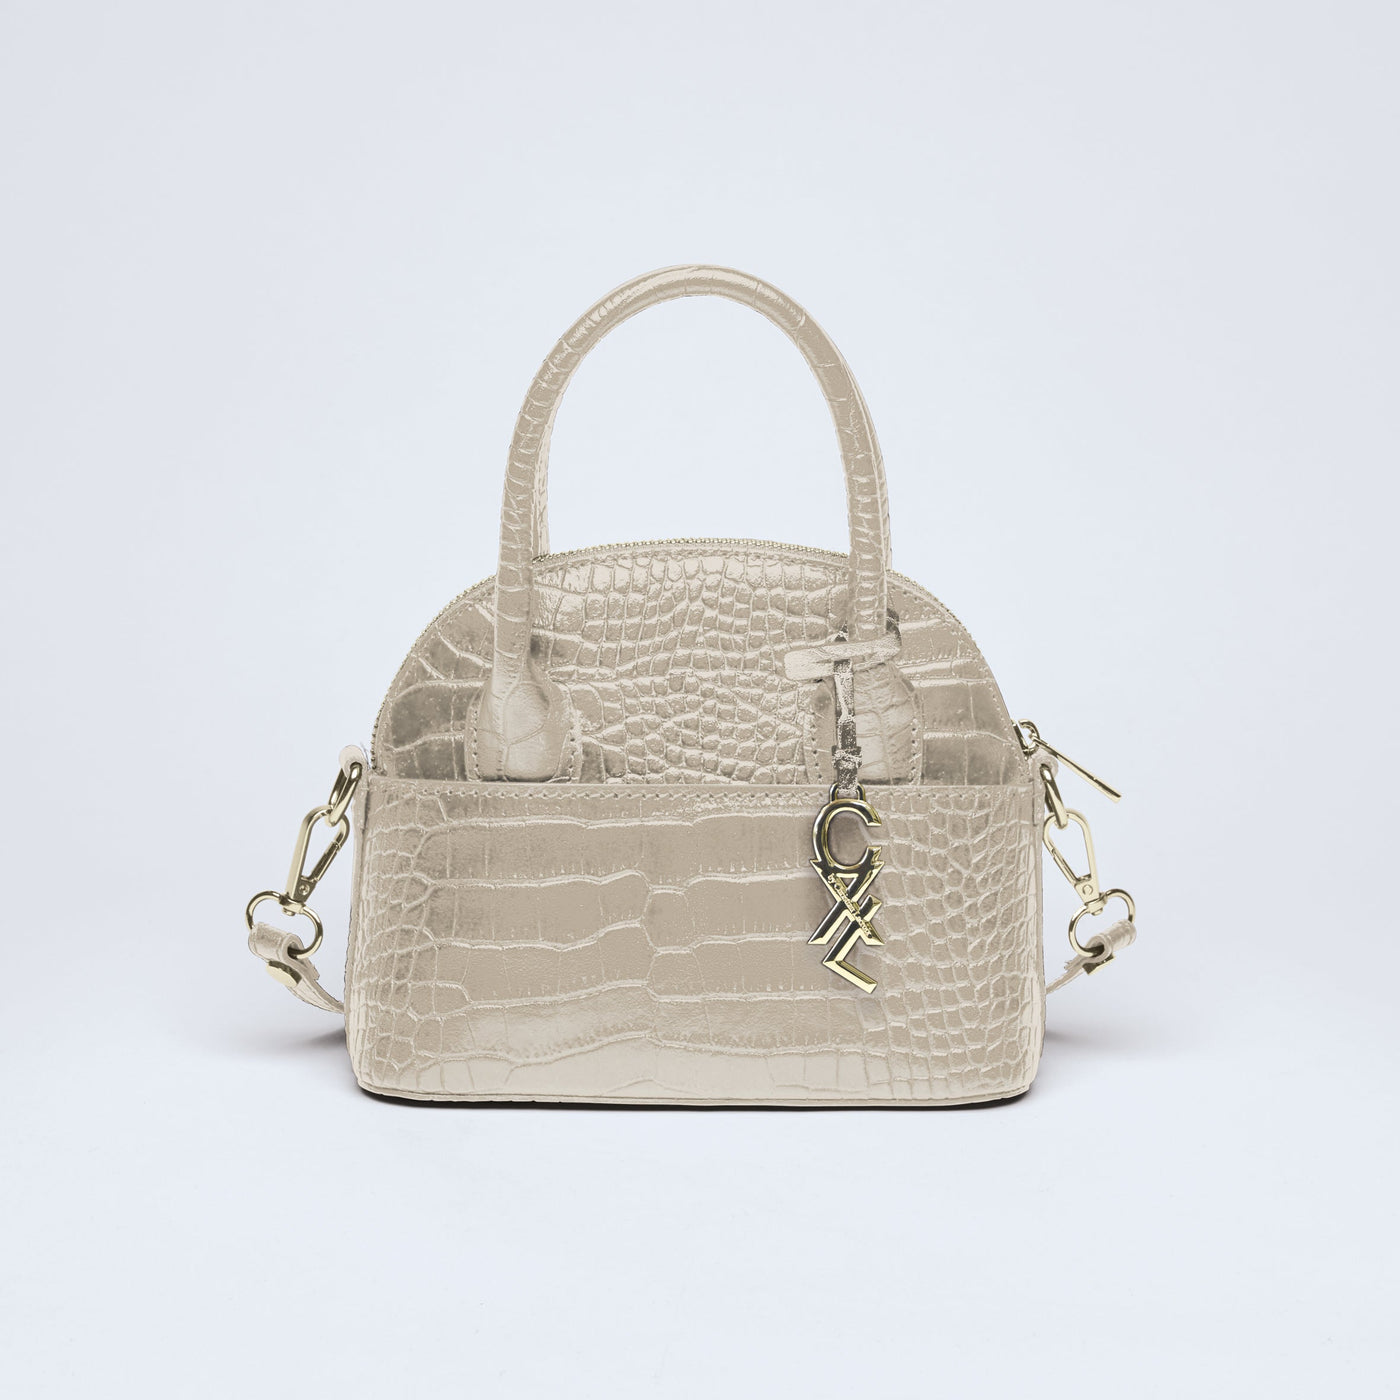 Small croco leather bowling bag Bel-air